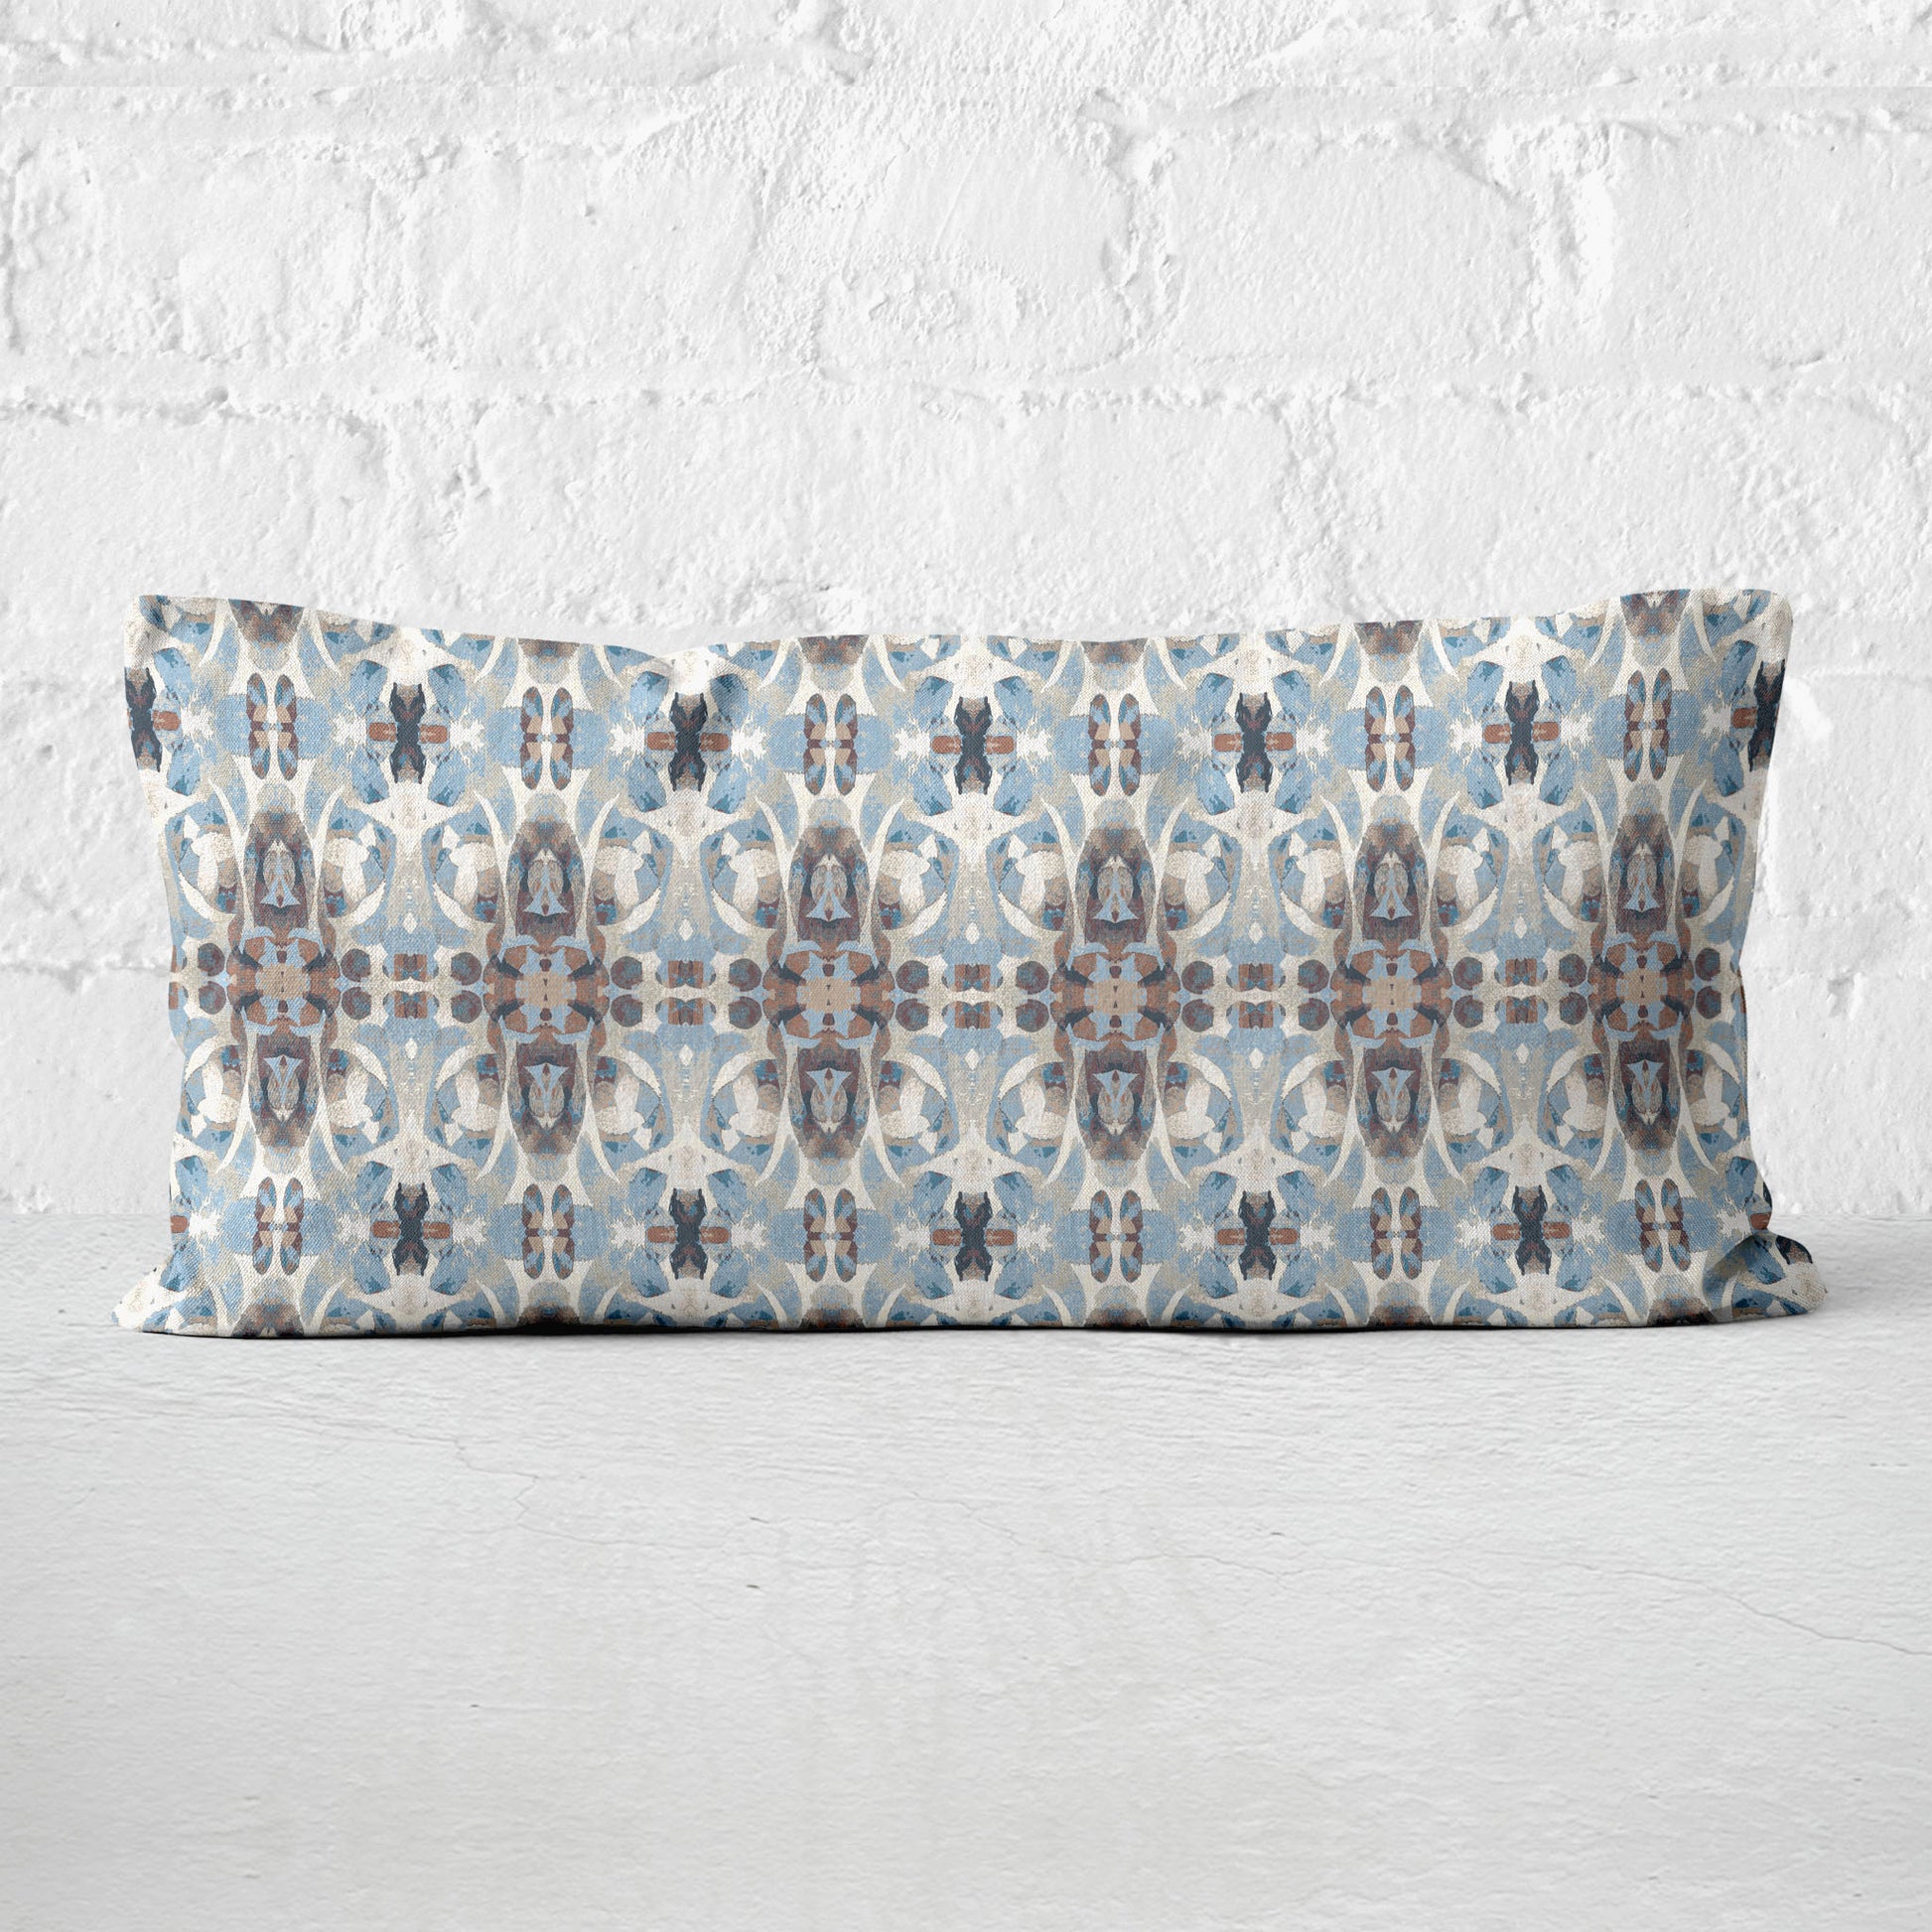 12 x 24 lumbar pillow featuring an abstract hand-painted blue and brown pattern leaning against a white brick wall.